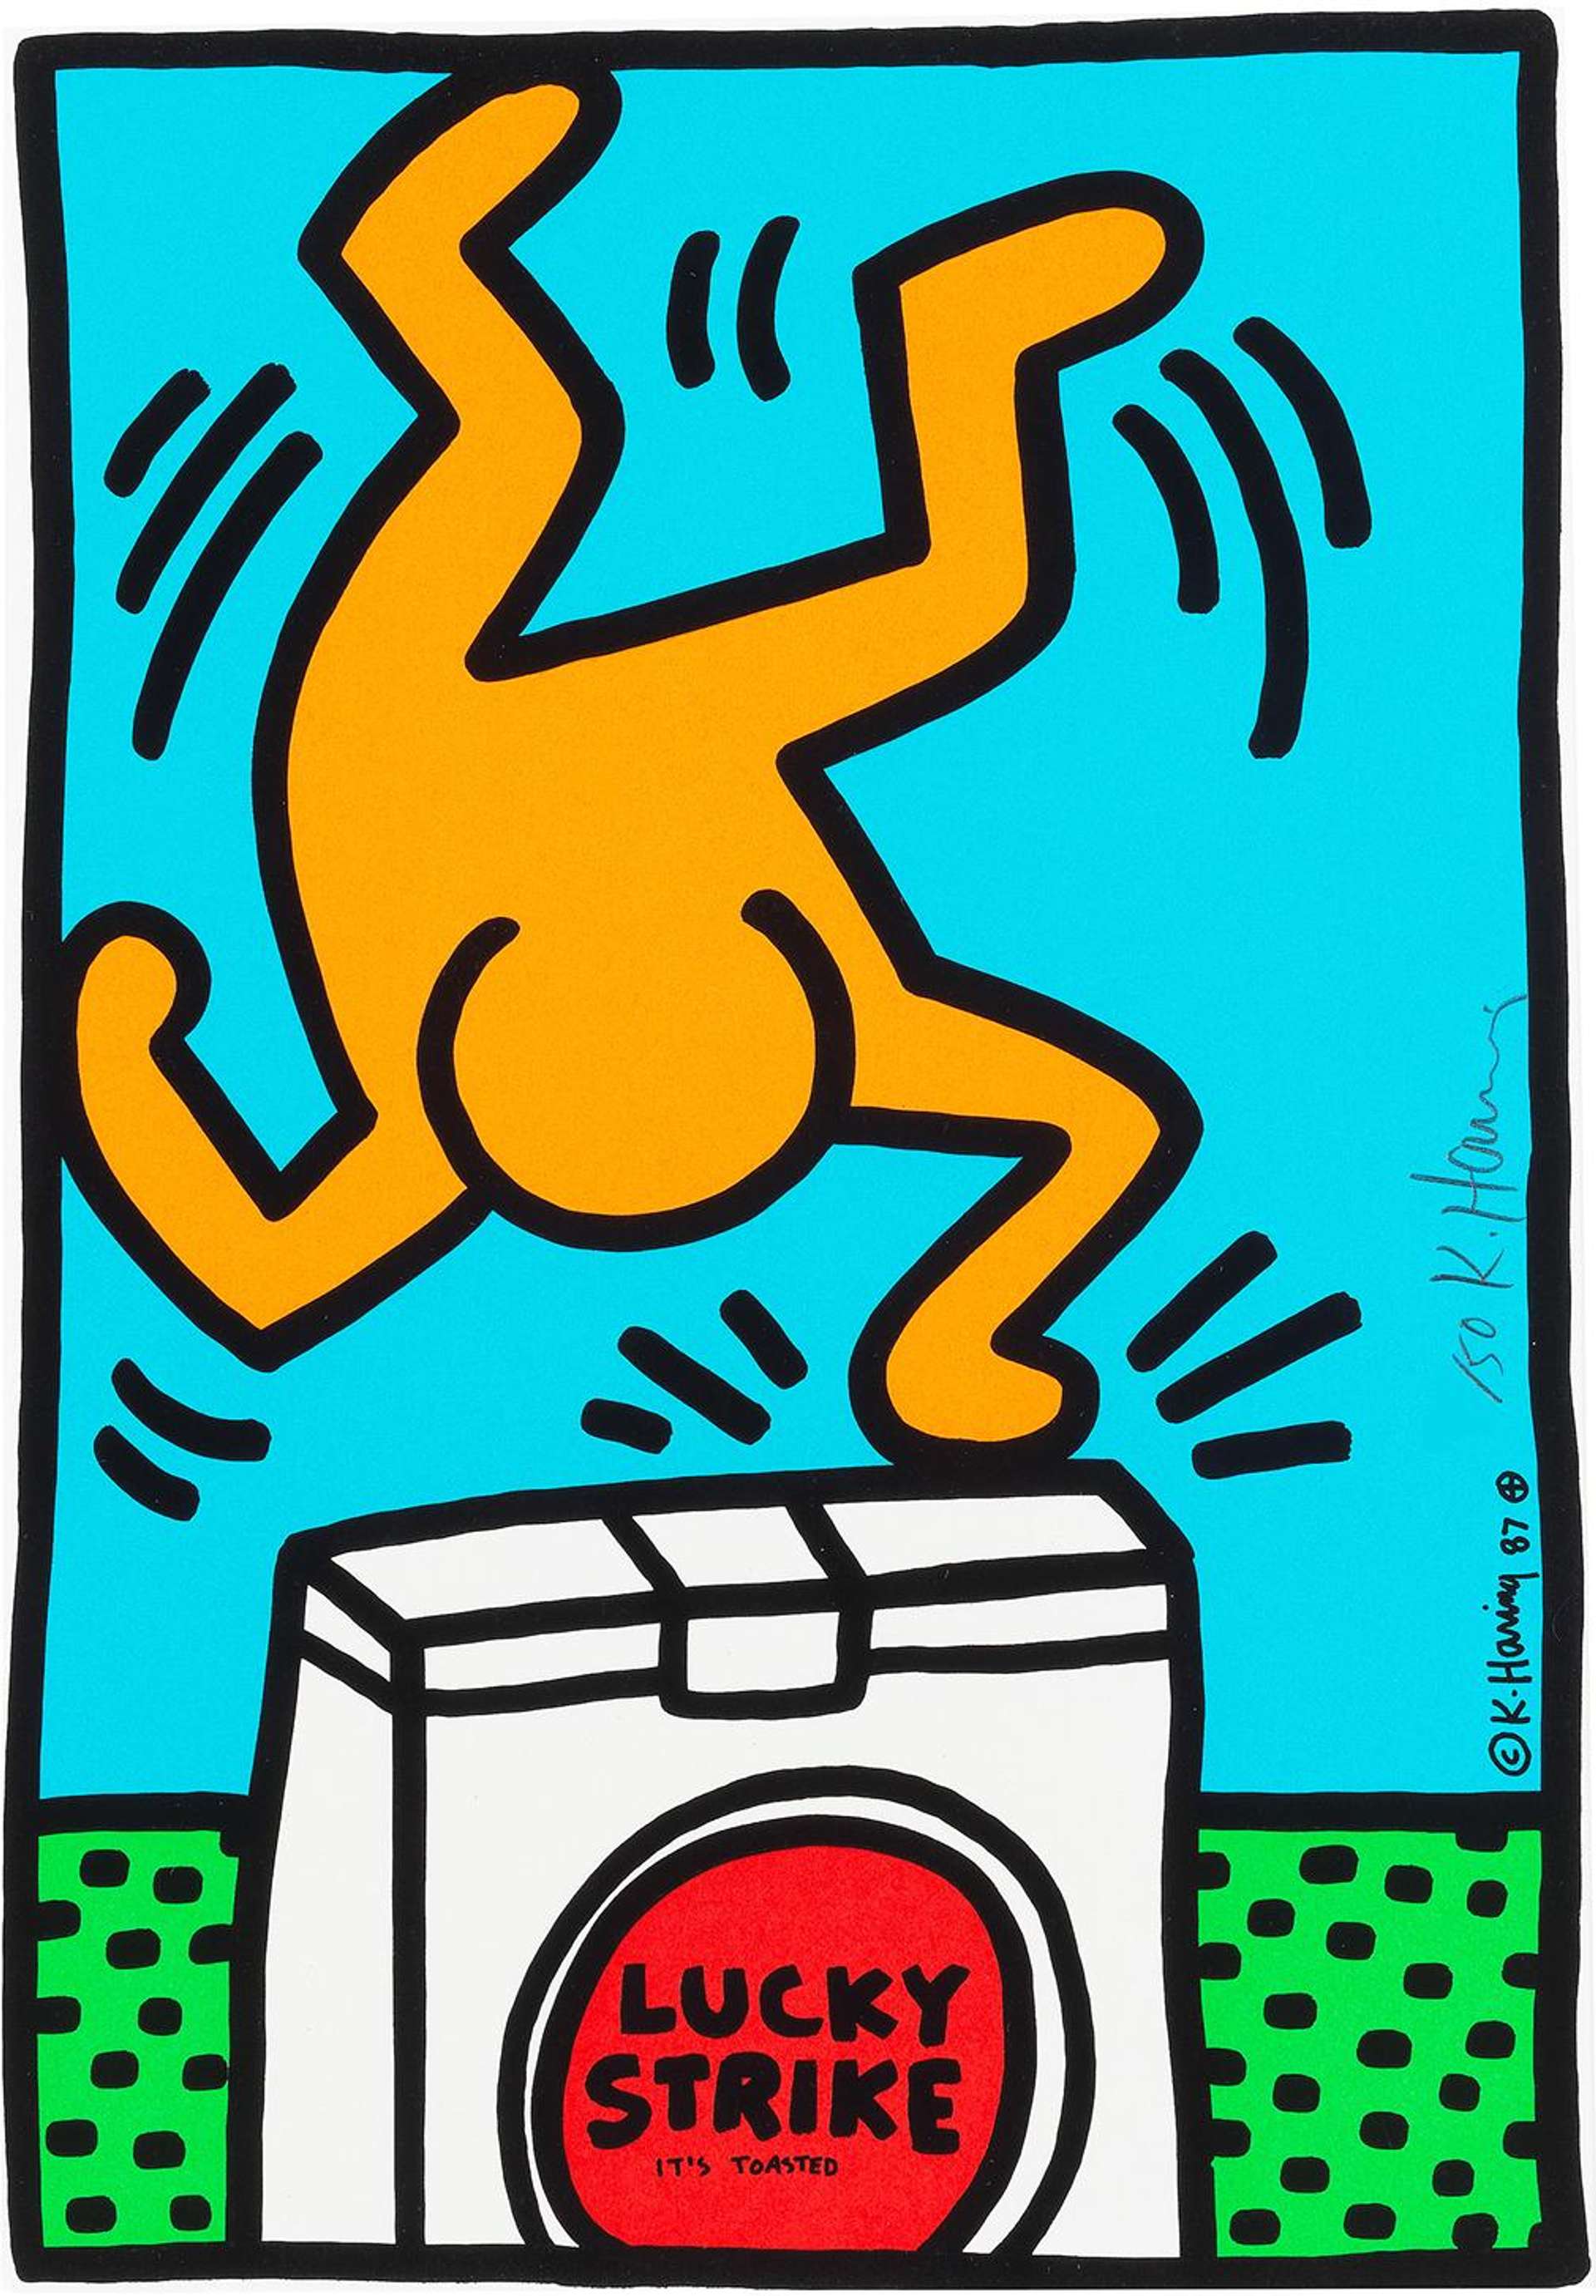 Keith Haring’s Lucky Strike (blue). A Pop Art screenprint of a yellow animated figure upside down on a carton of cigarettes. 